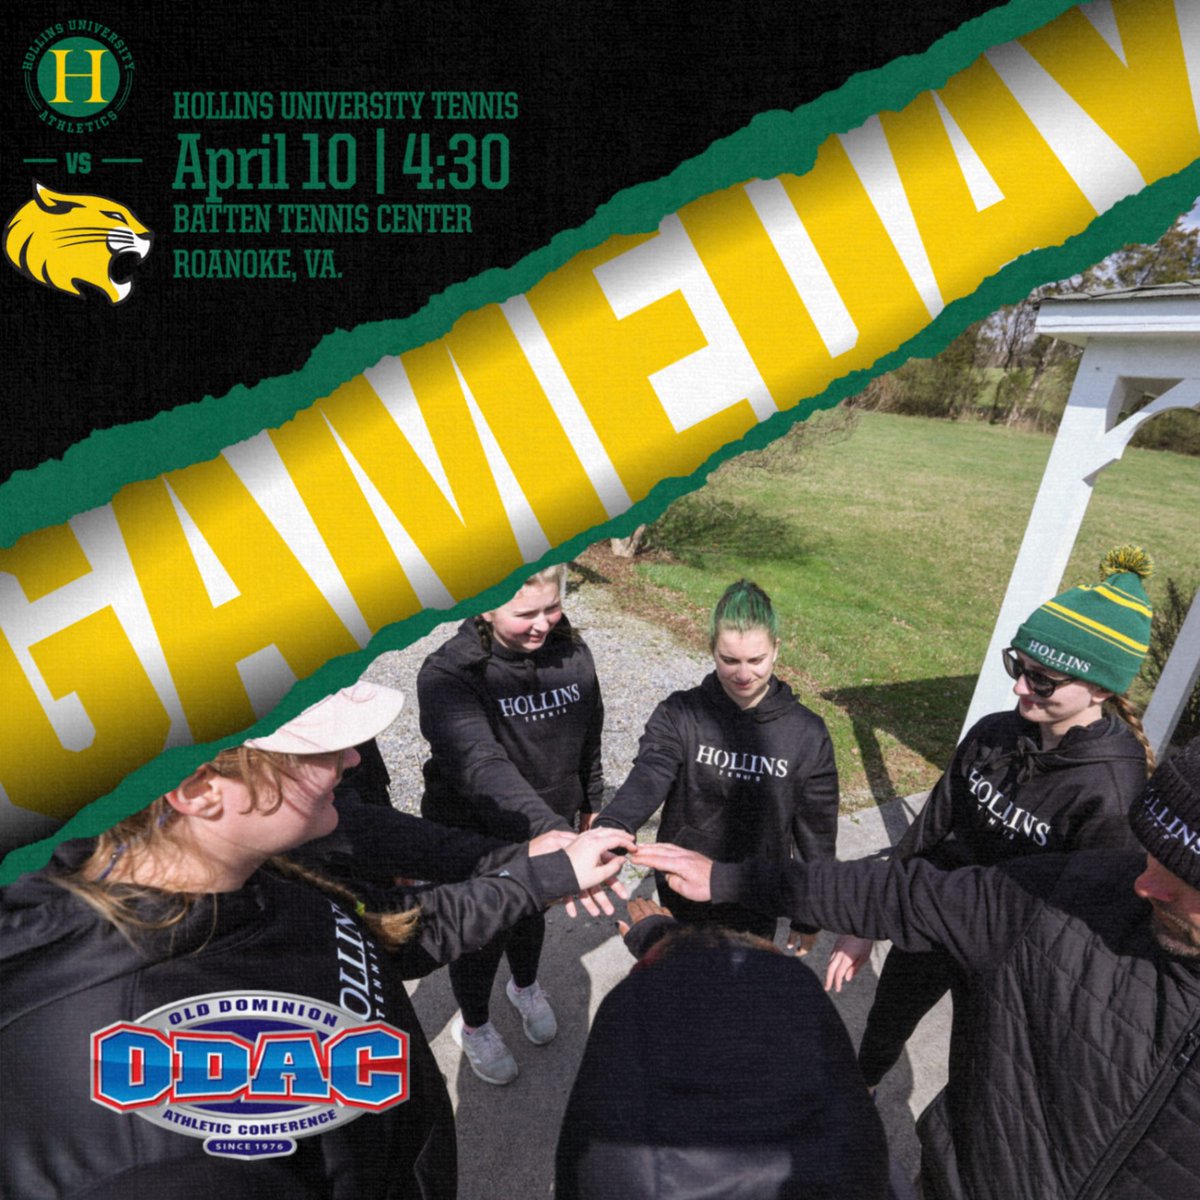 GAMEDAY for Hollins tennis as the host Randolph College at 4:30pm today at the Batten Tennis Center. #MyHollins